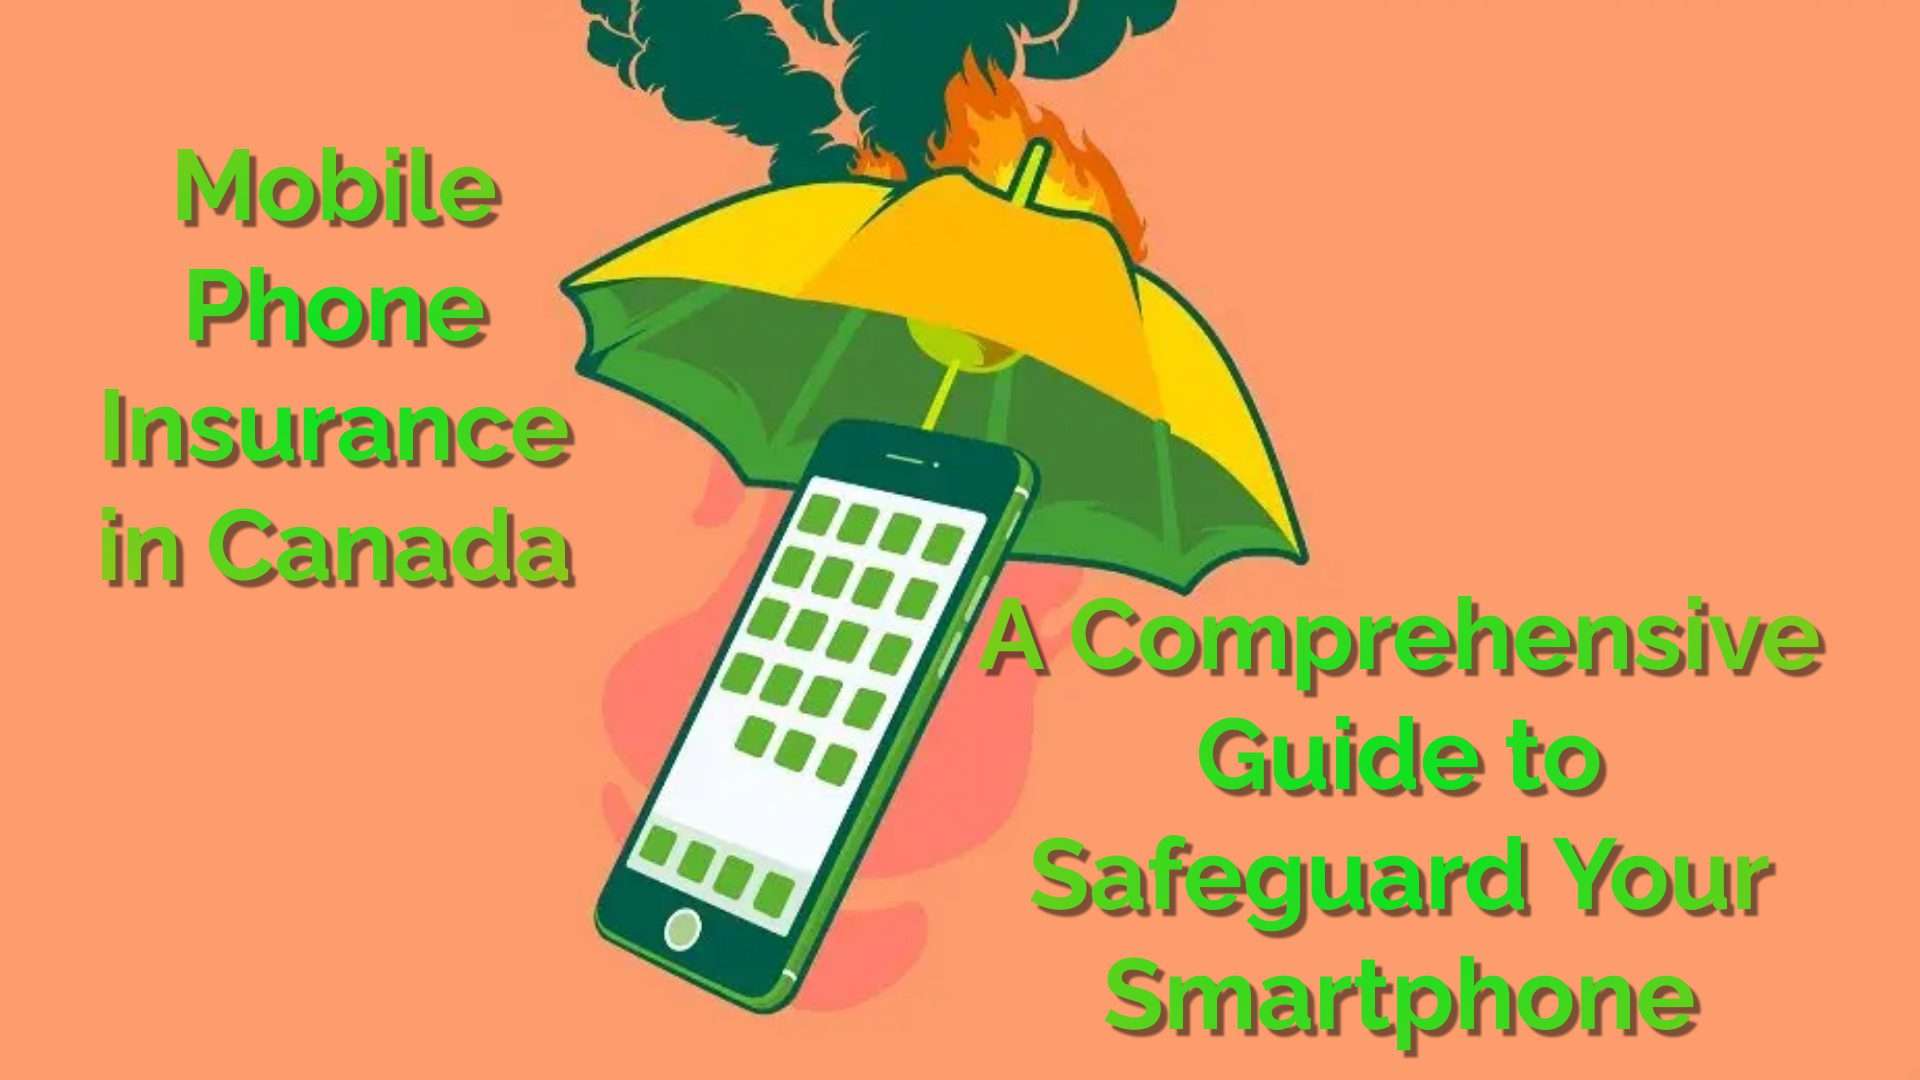 The Mobile Phone Insurance In Canada